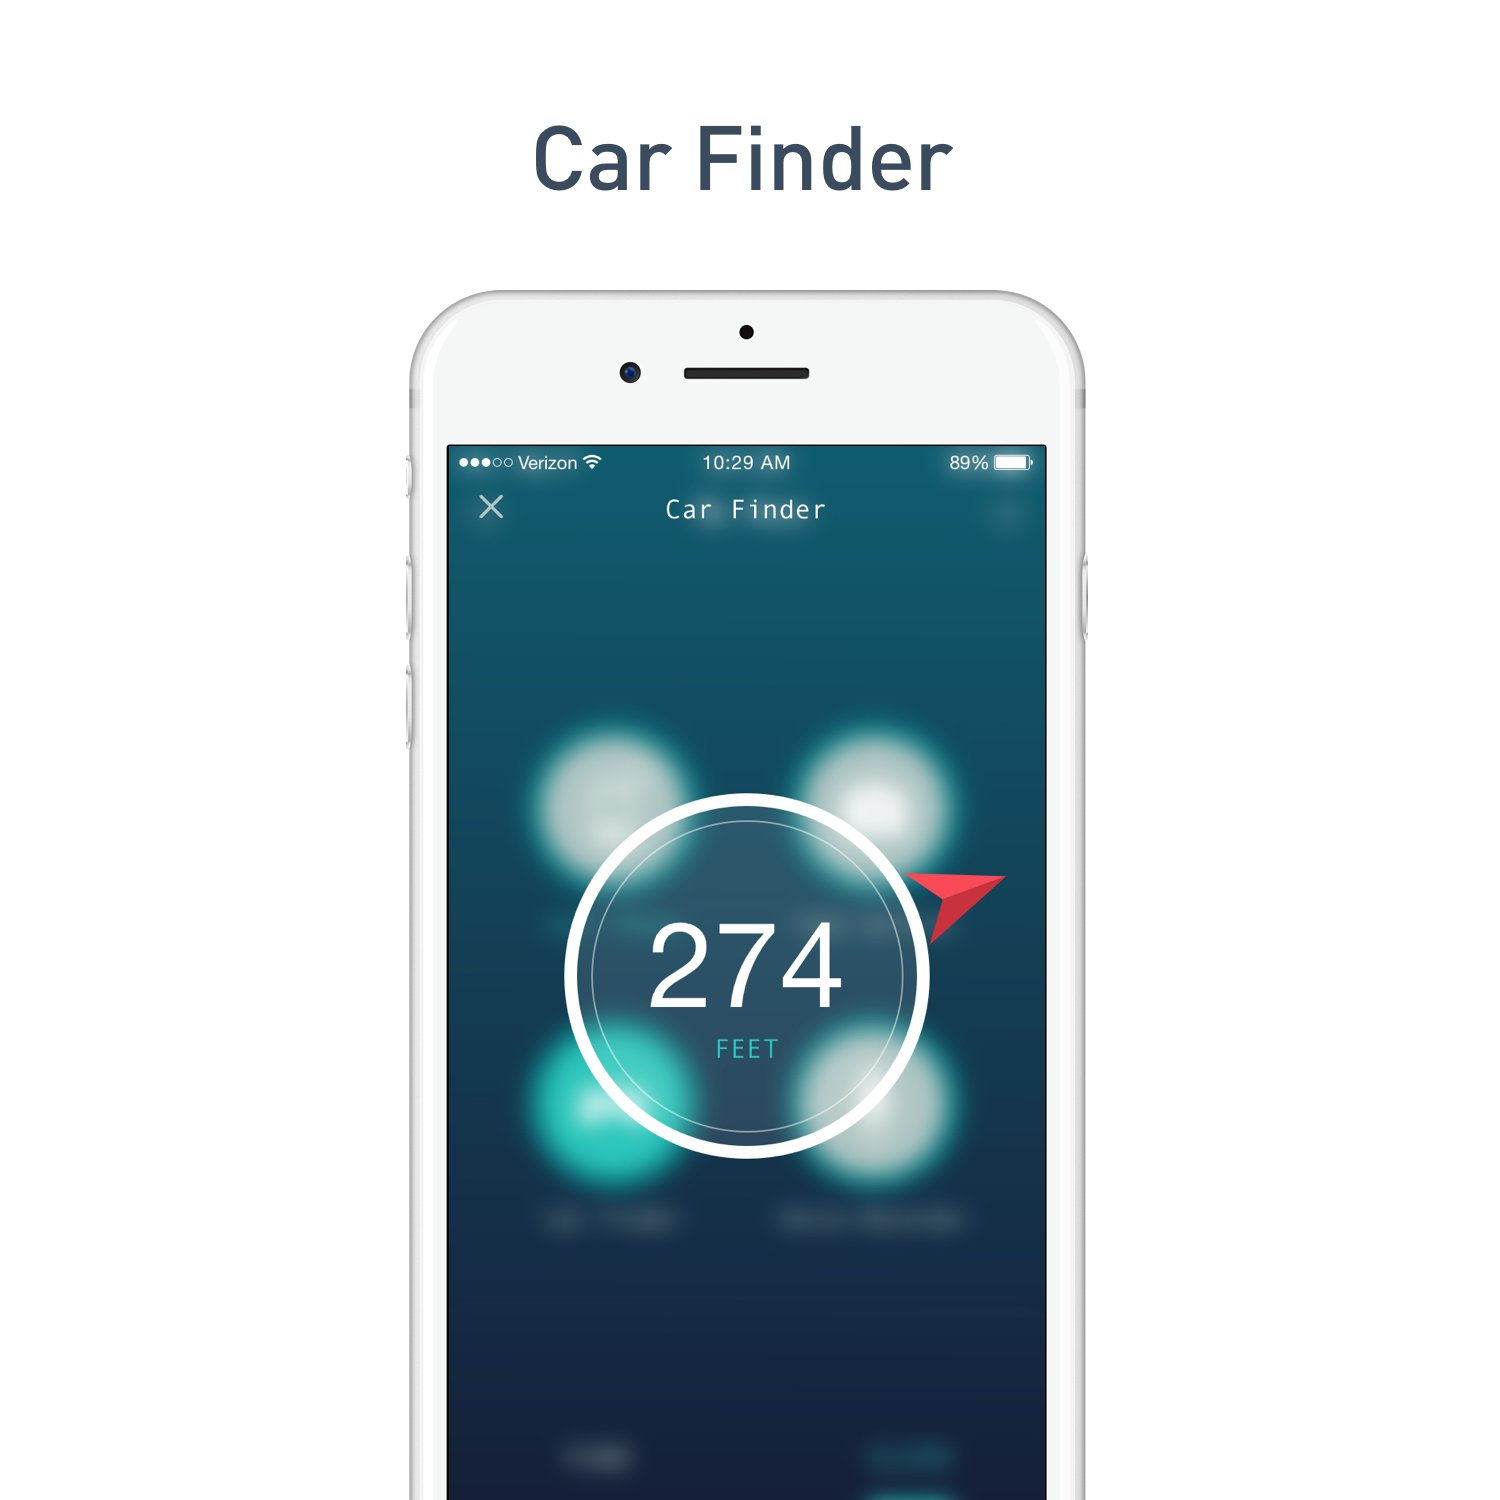 nonda iHere Key Finder, Phone Finder, Car Finder, Selfie Remote and Voice Recording Rechargeable Bluetooth Tracker for iPhone 4S/5/6/6S, iPad, Samsung Galaxy S5/S6/Note 4 and More (Gen 2)